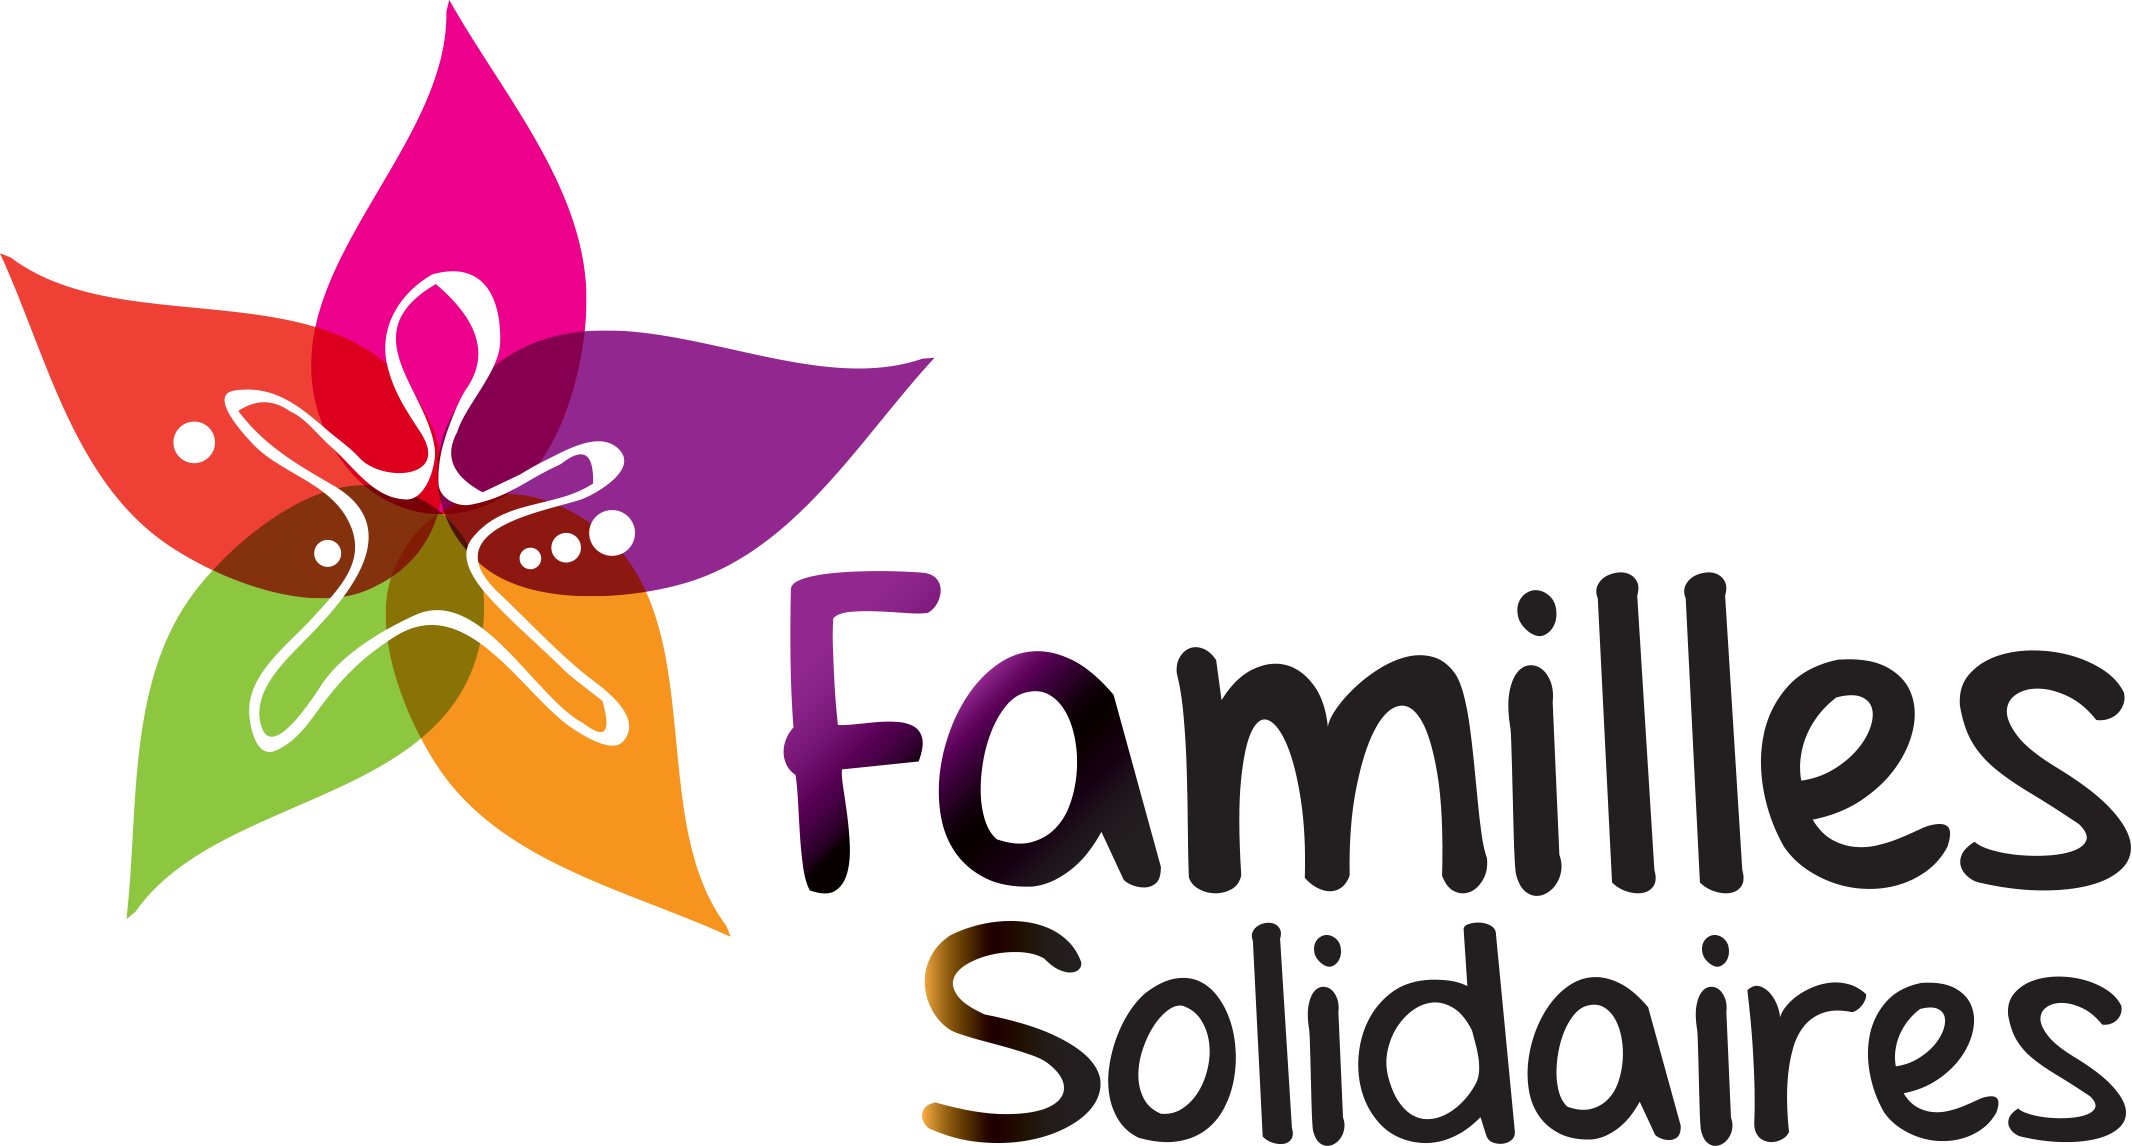 FAMILLES SOLIDAIRES - logo - new RVB